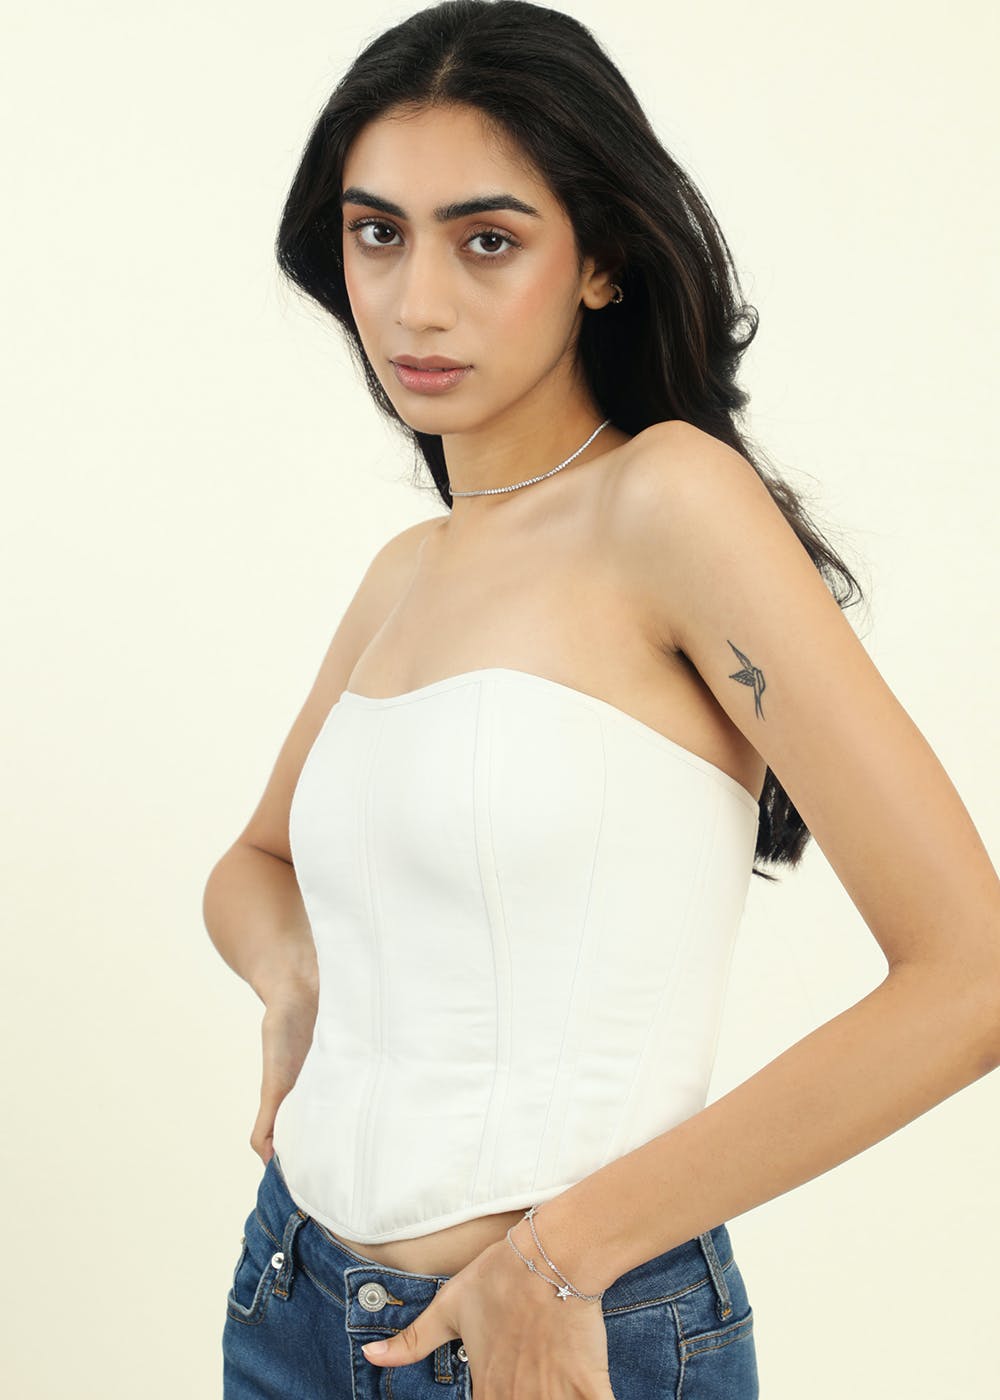 ONLY AT NIGHT UNDERBOOB CORSET TOP #white #button #down #shirt